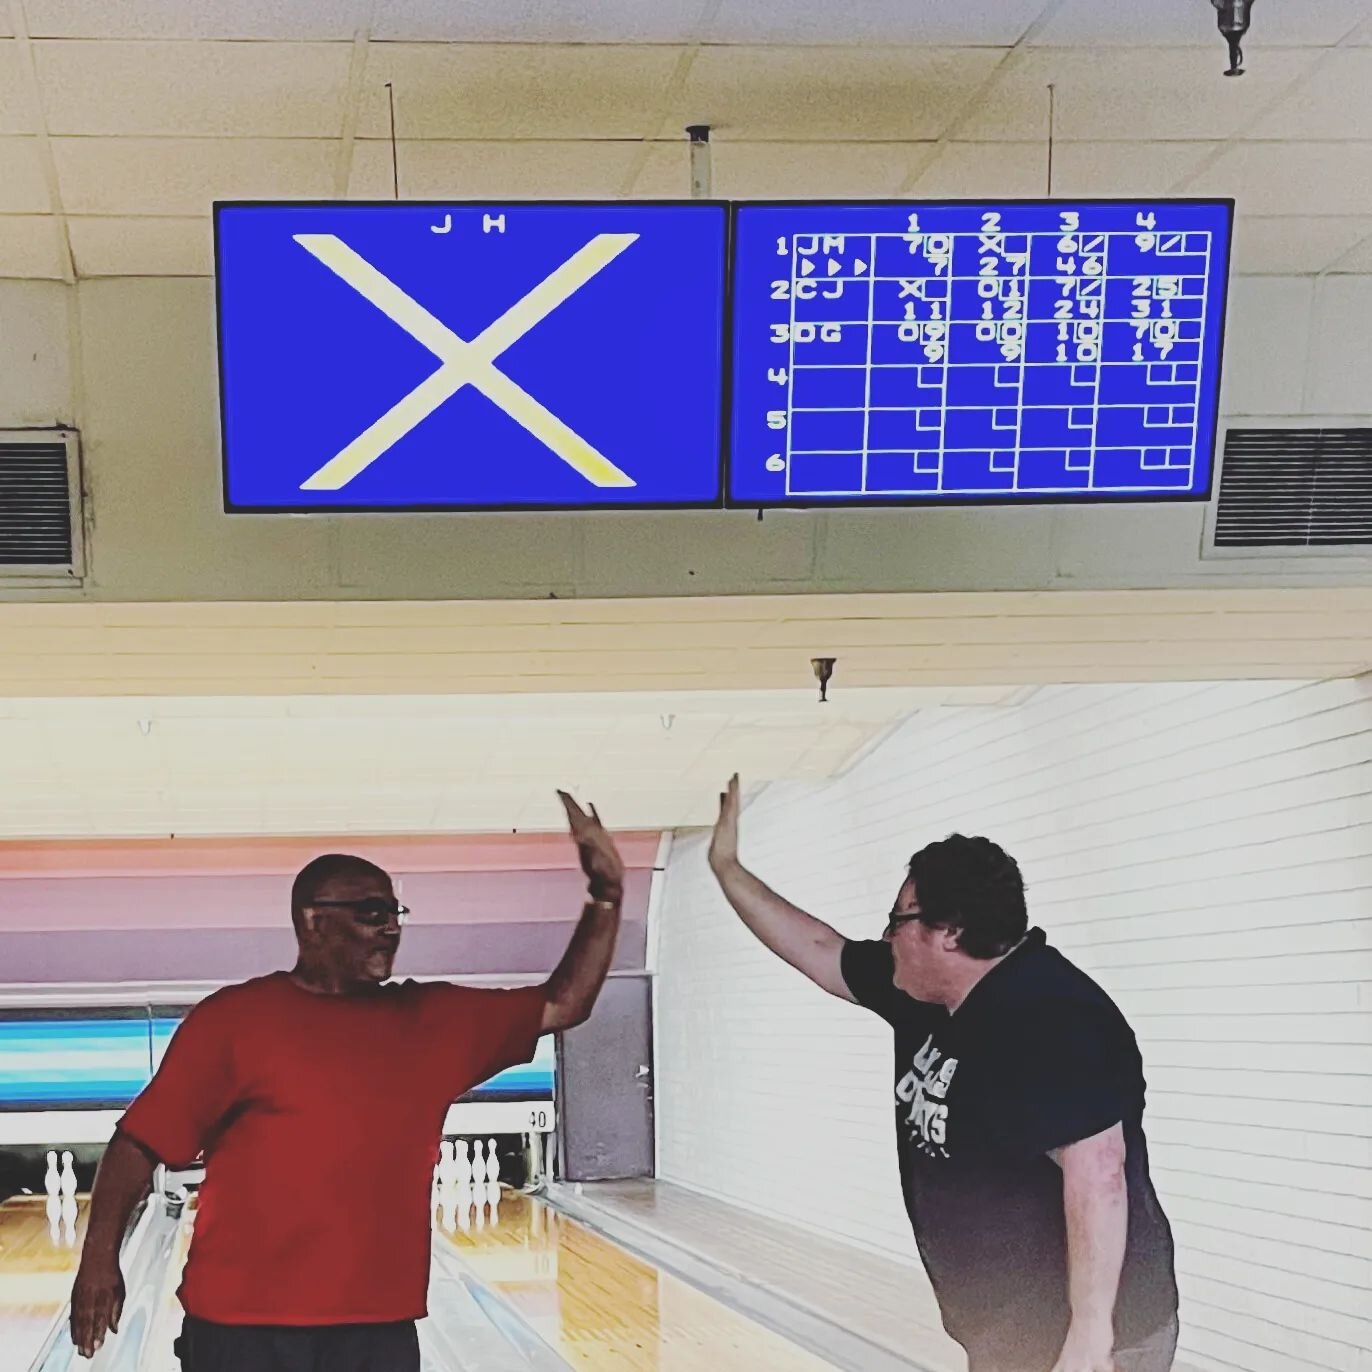 More bowling fun 🤩 We have some serious talent among our members 🎳💯